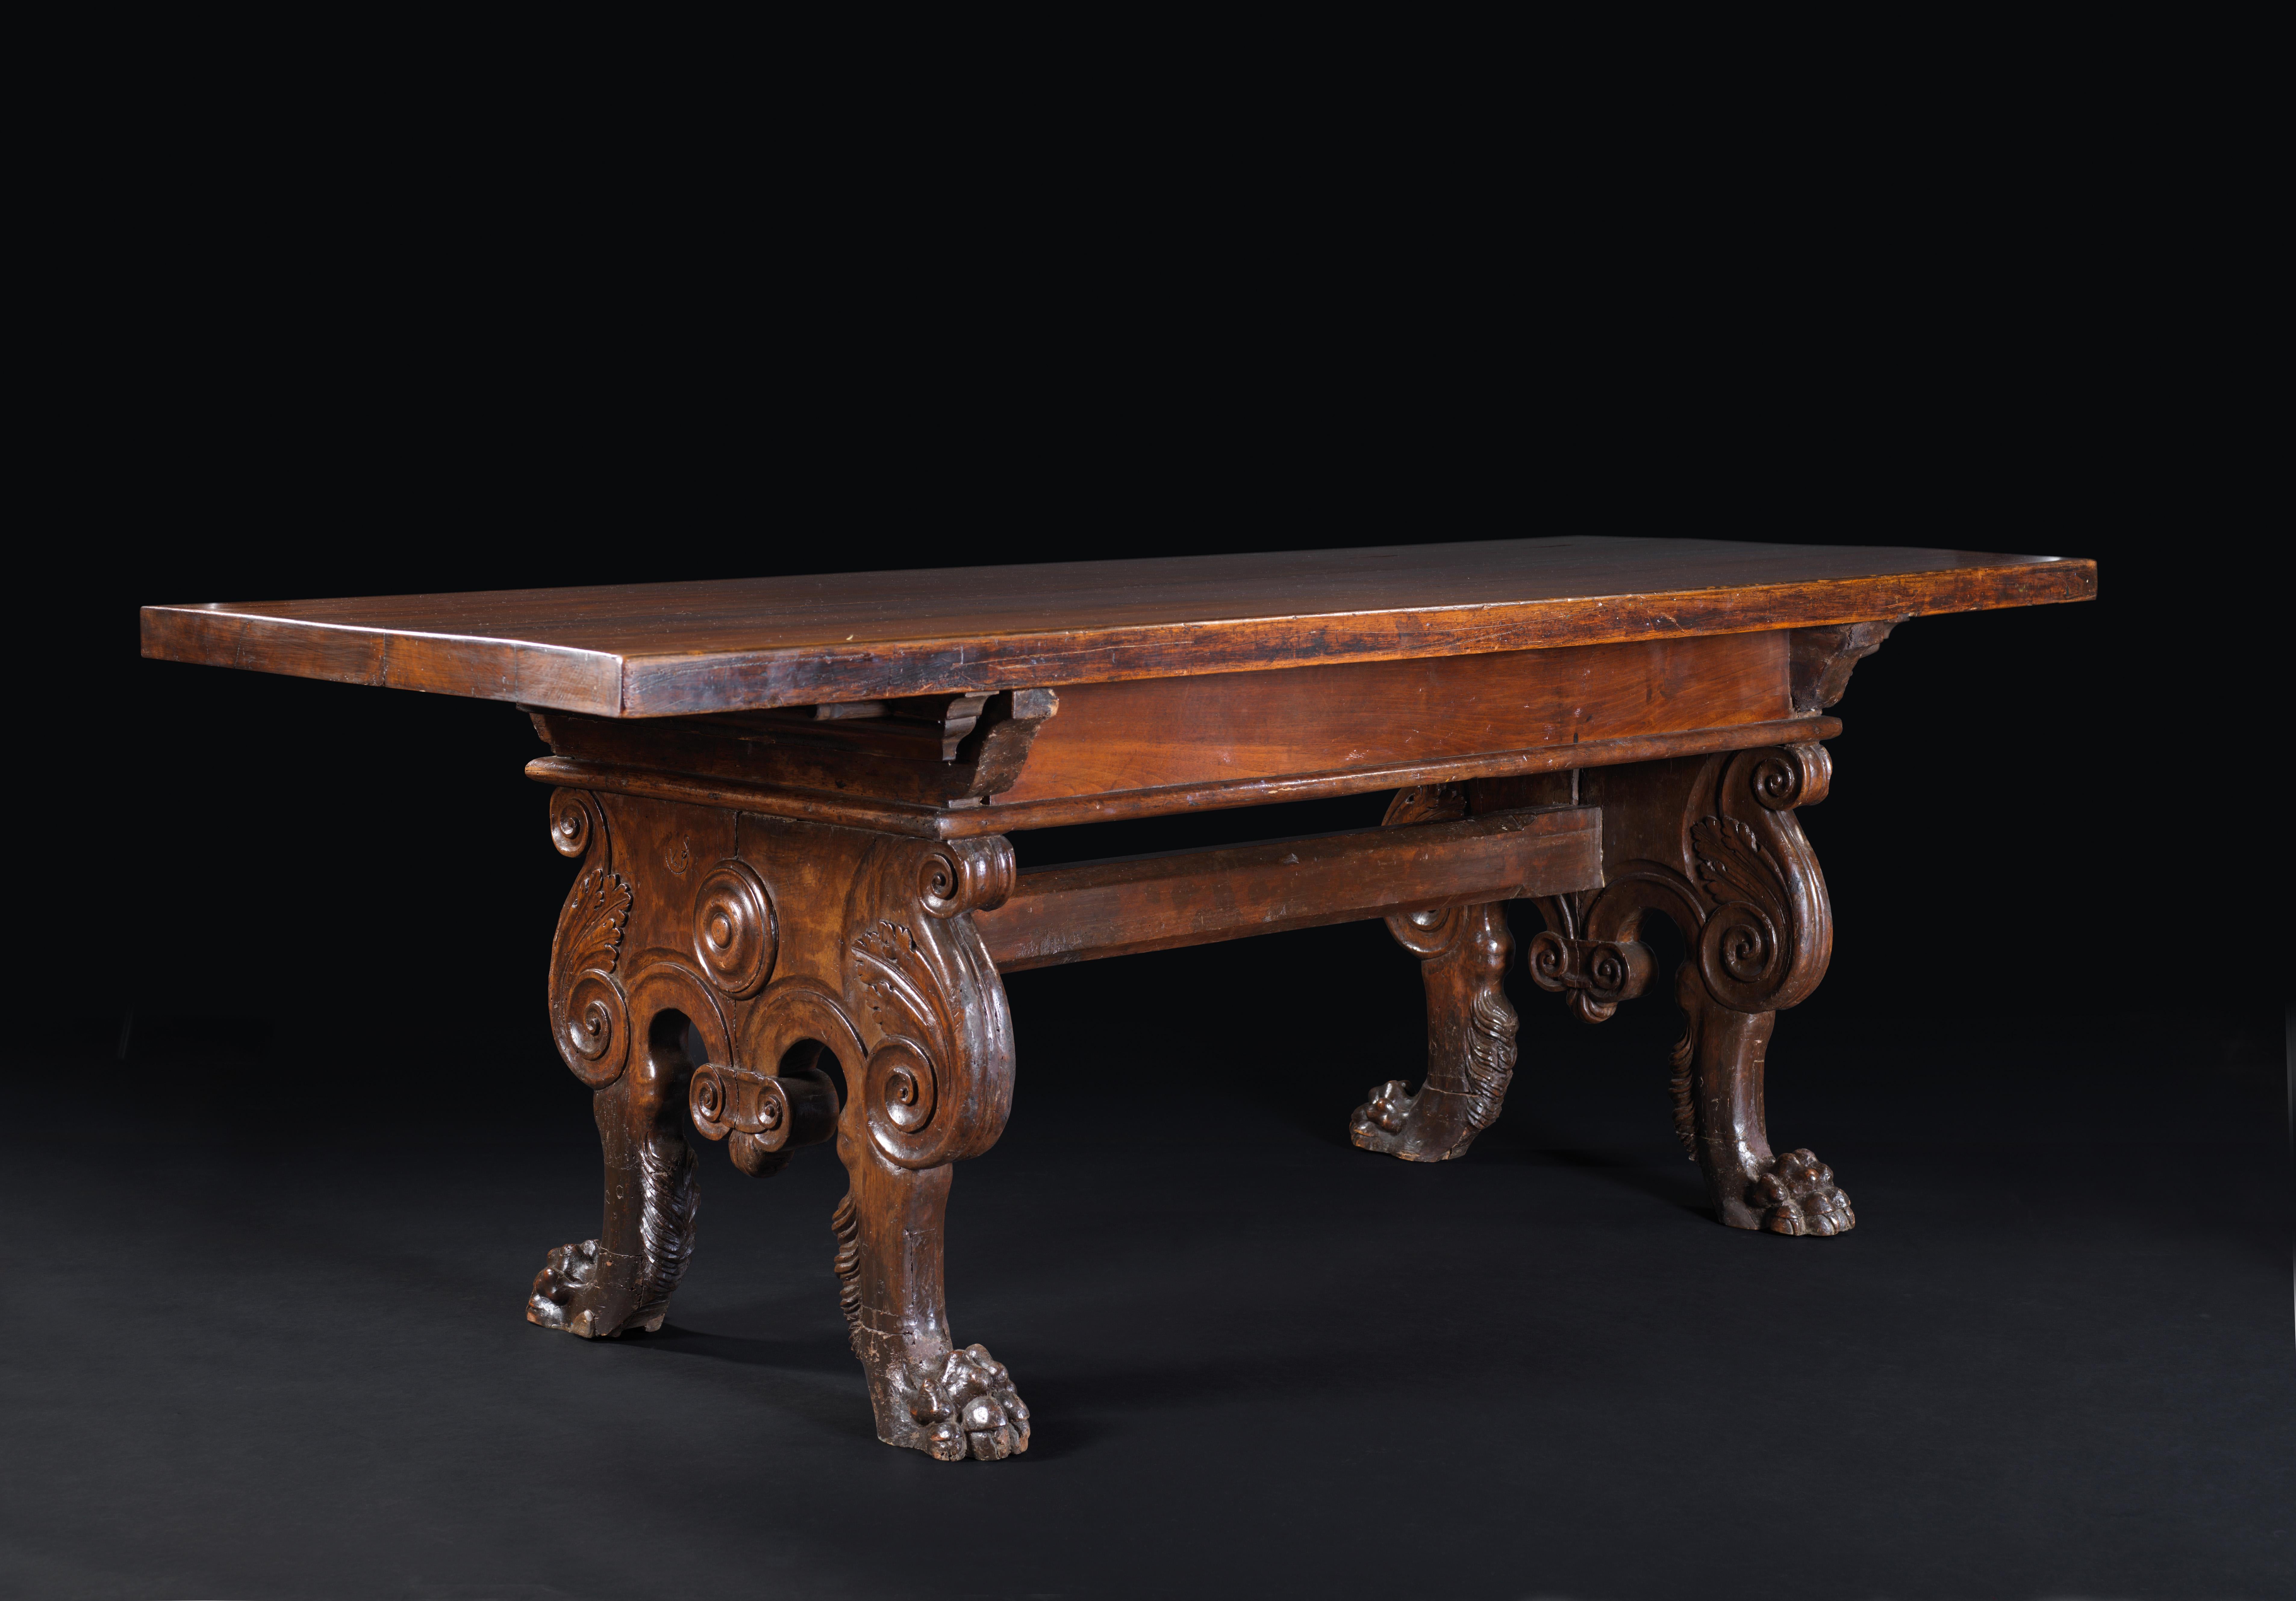 In the beginning the table was a movable furniture with removable feet, easy to build and disassemble. Most of the 15th and 16th century tables are built following the Roman cartibula principles that is a plate standing on two large stands secured